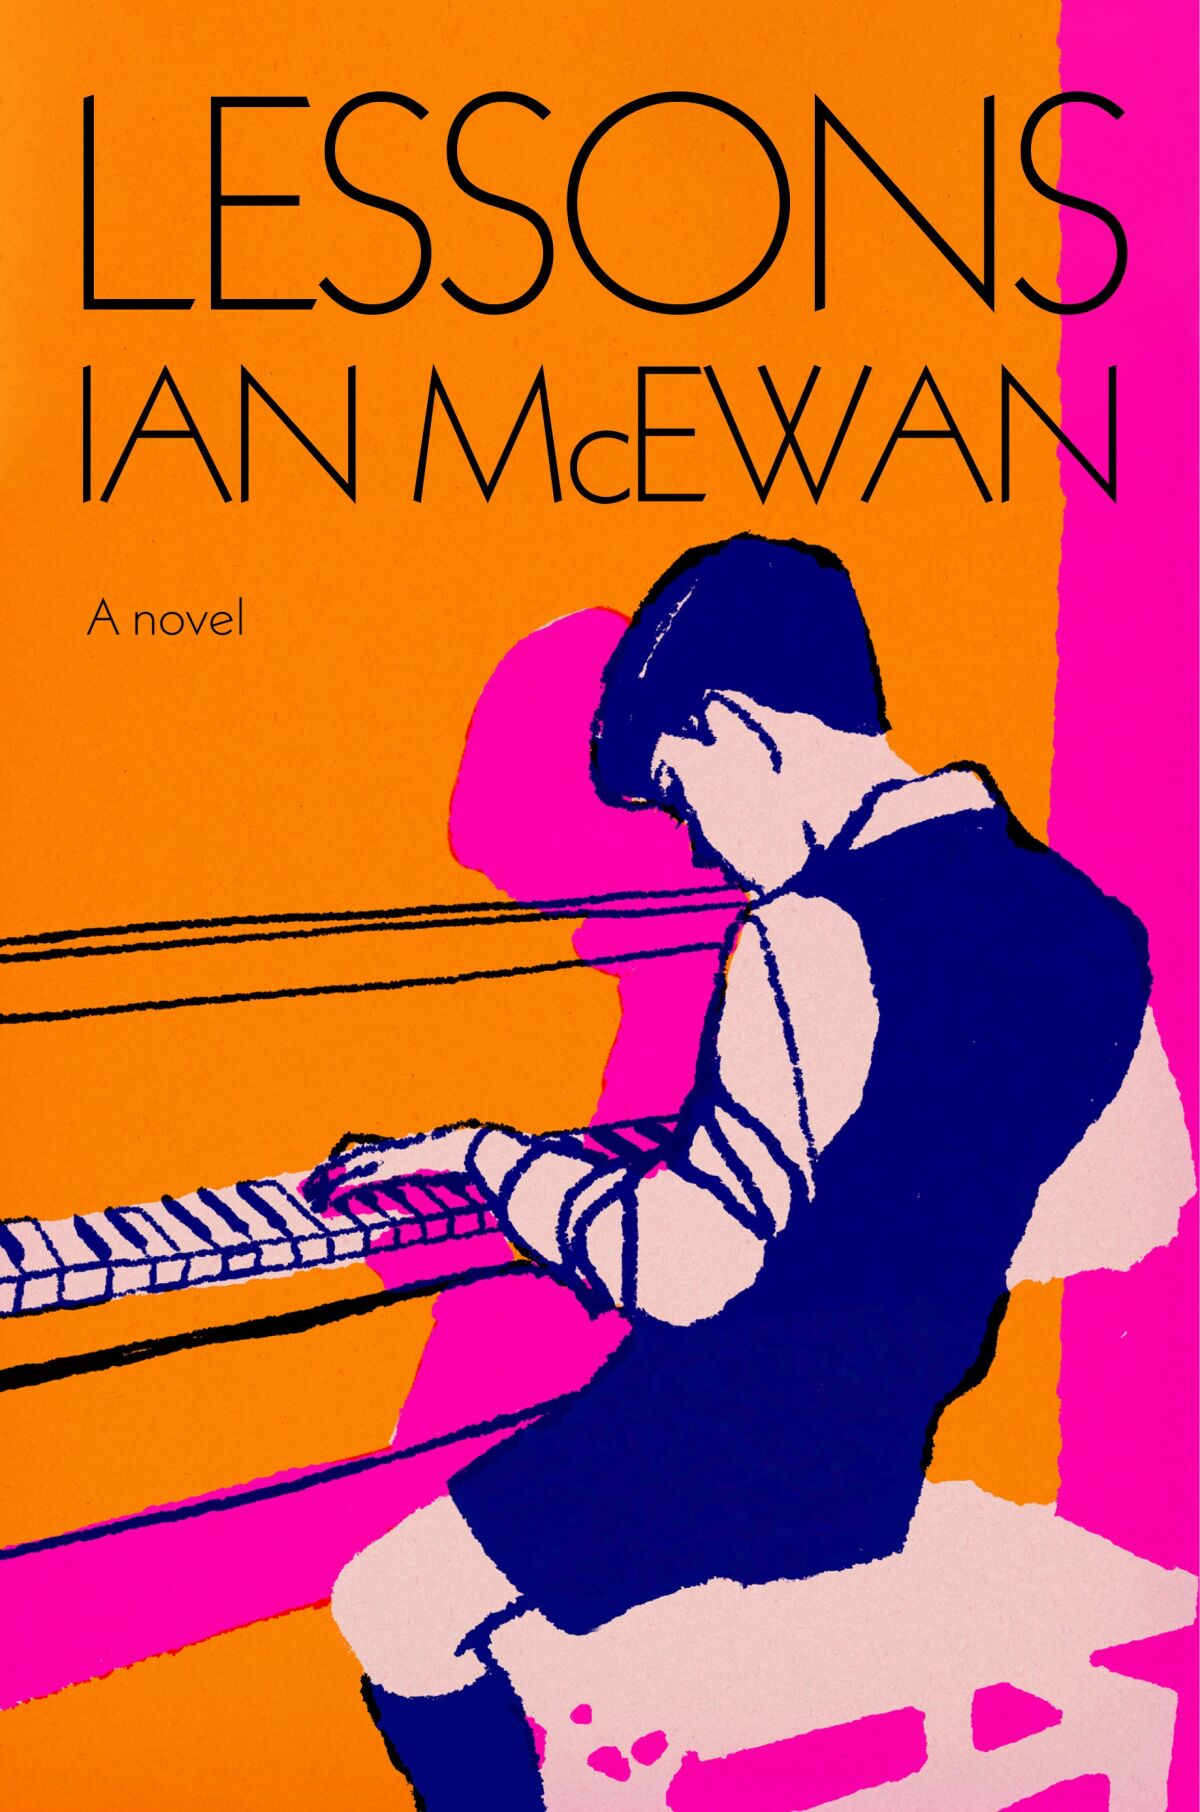 The cover of "Lesson: A Novel" contains a drawing of a boy at the piano.